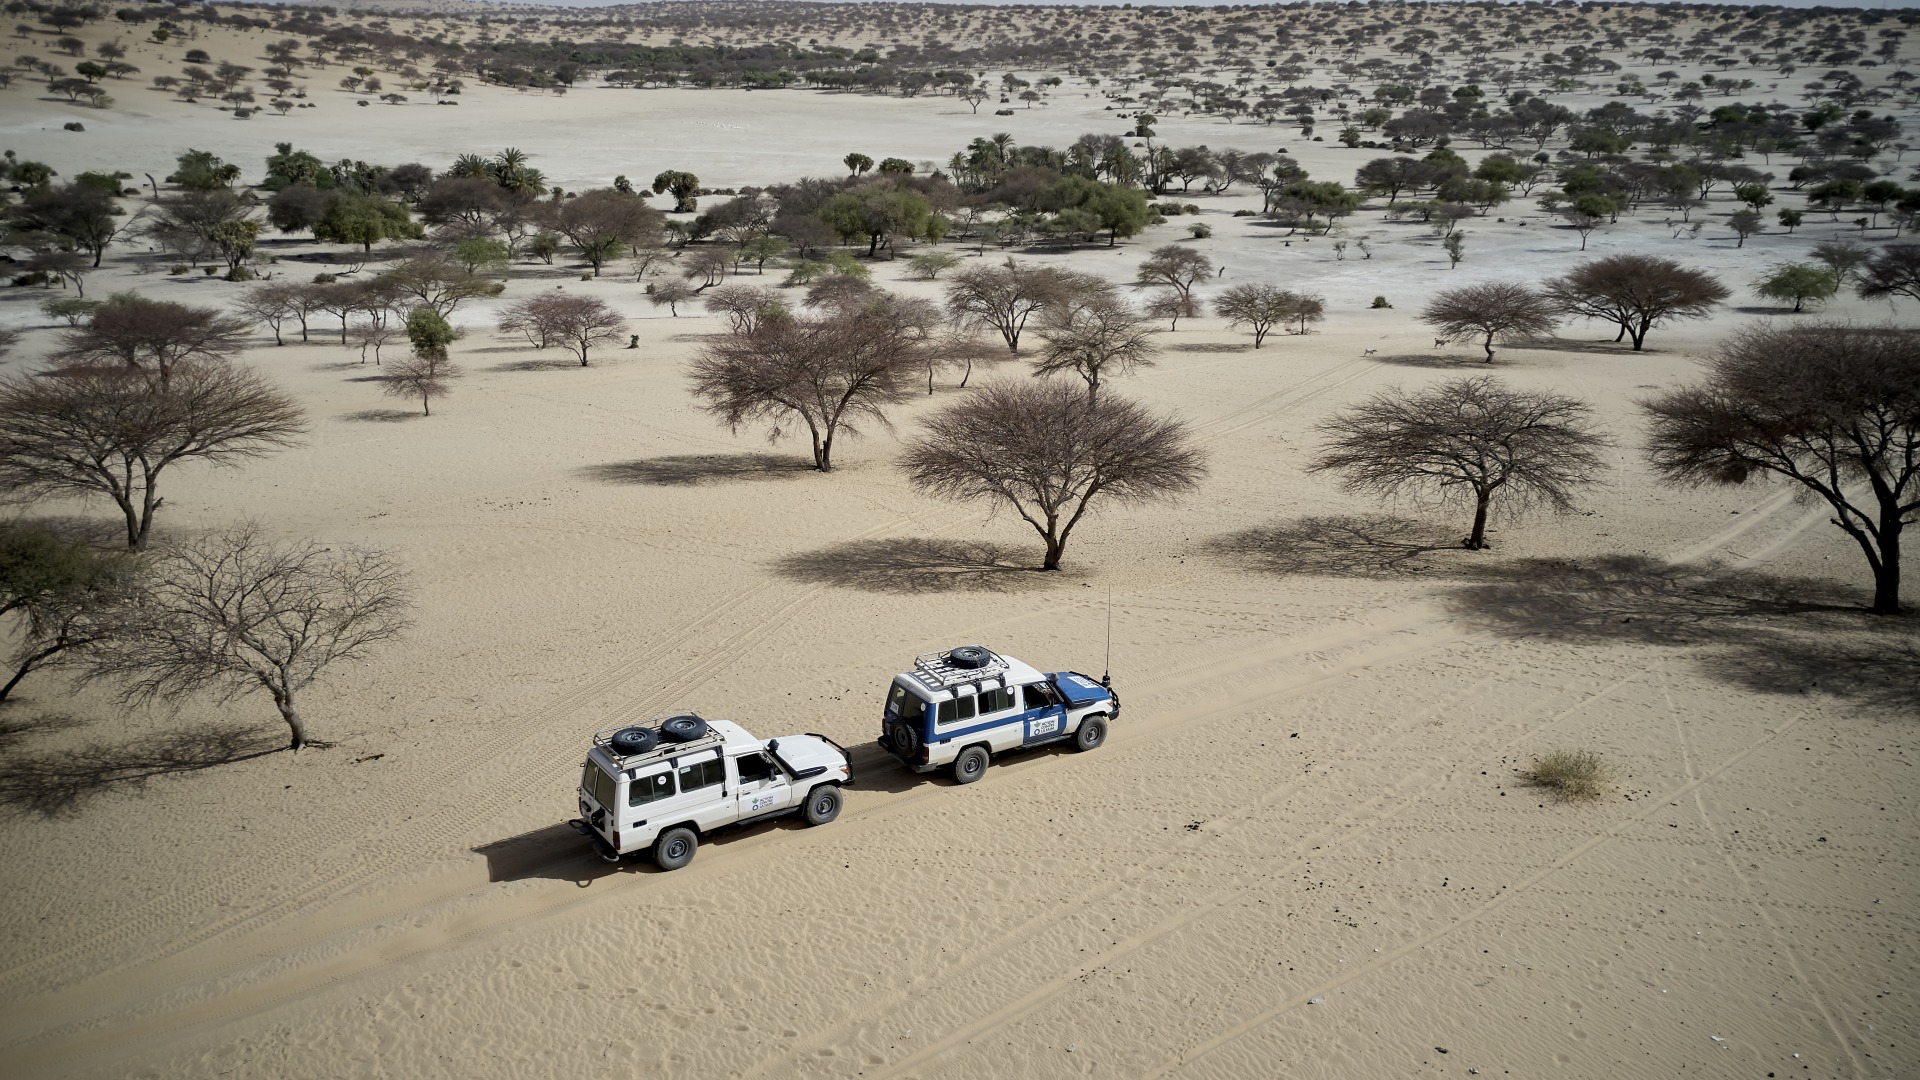 Action Against Hunger trucks drive through a desert in the Sahel region of West Africa.